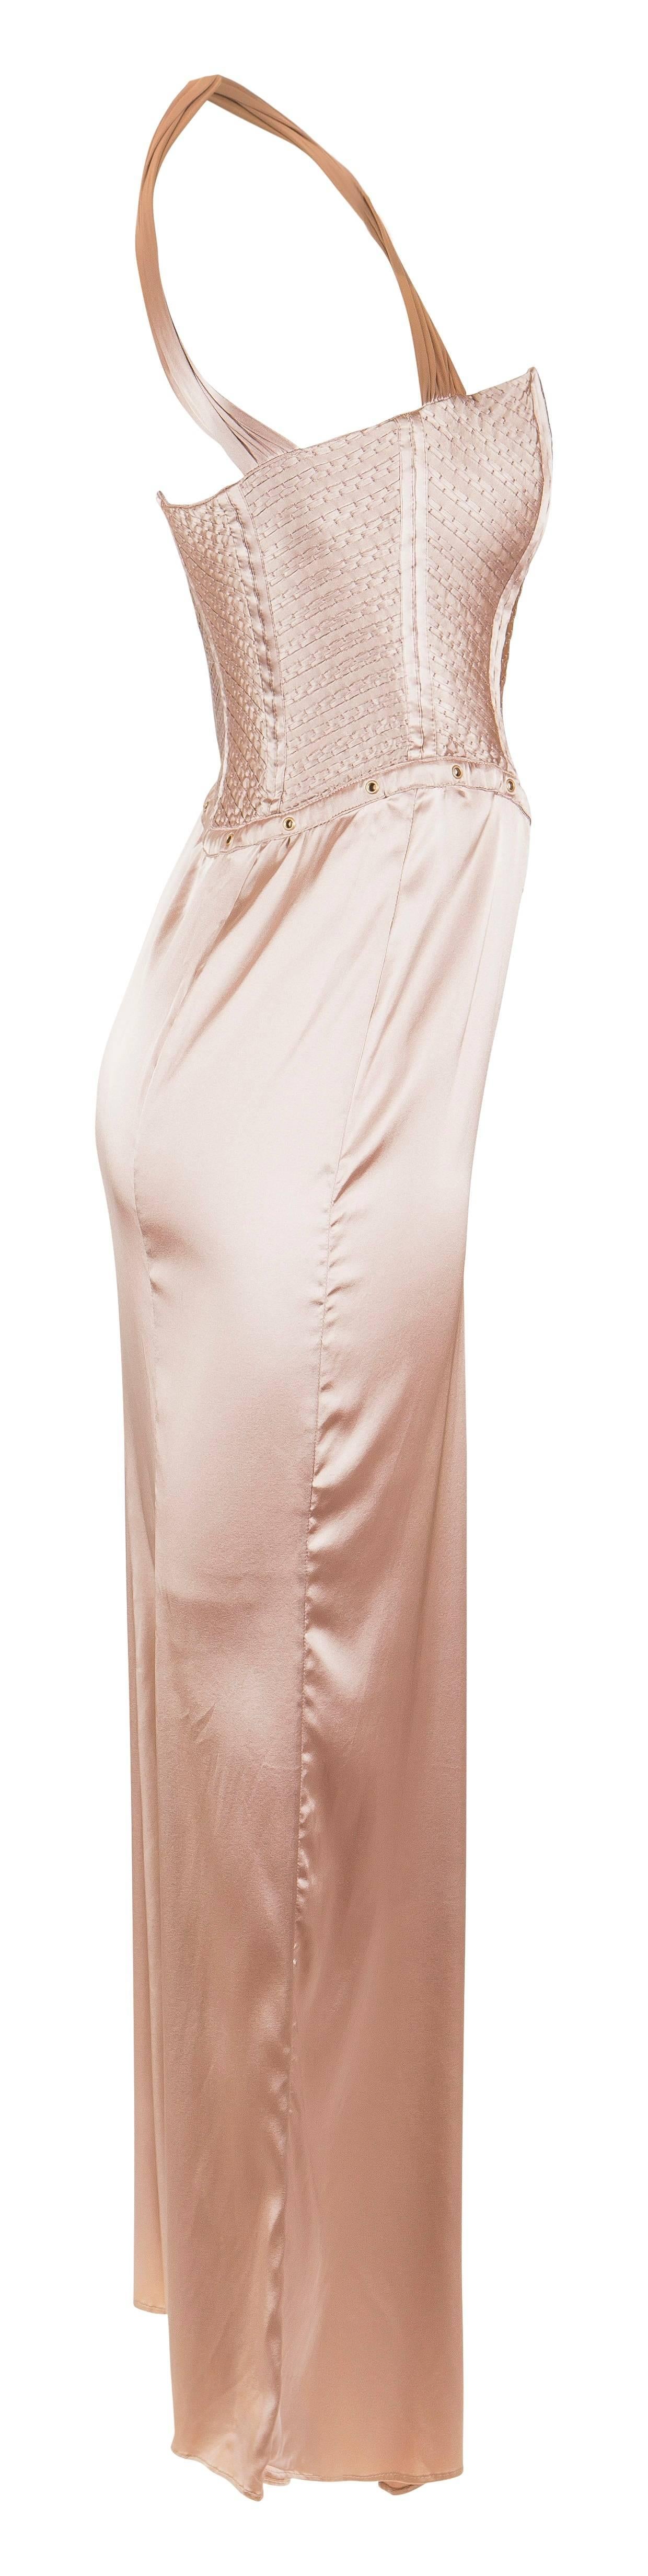 Tom Ford for Gucci 
Fall 2003 
Champagne Silk Jersey Corset Gown 
Grommet detail
Some minor fading at bottom of dress
size 38